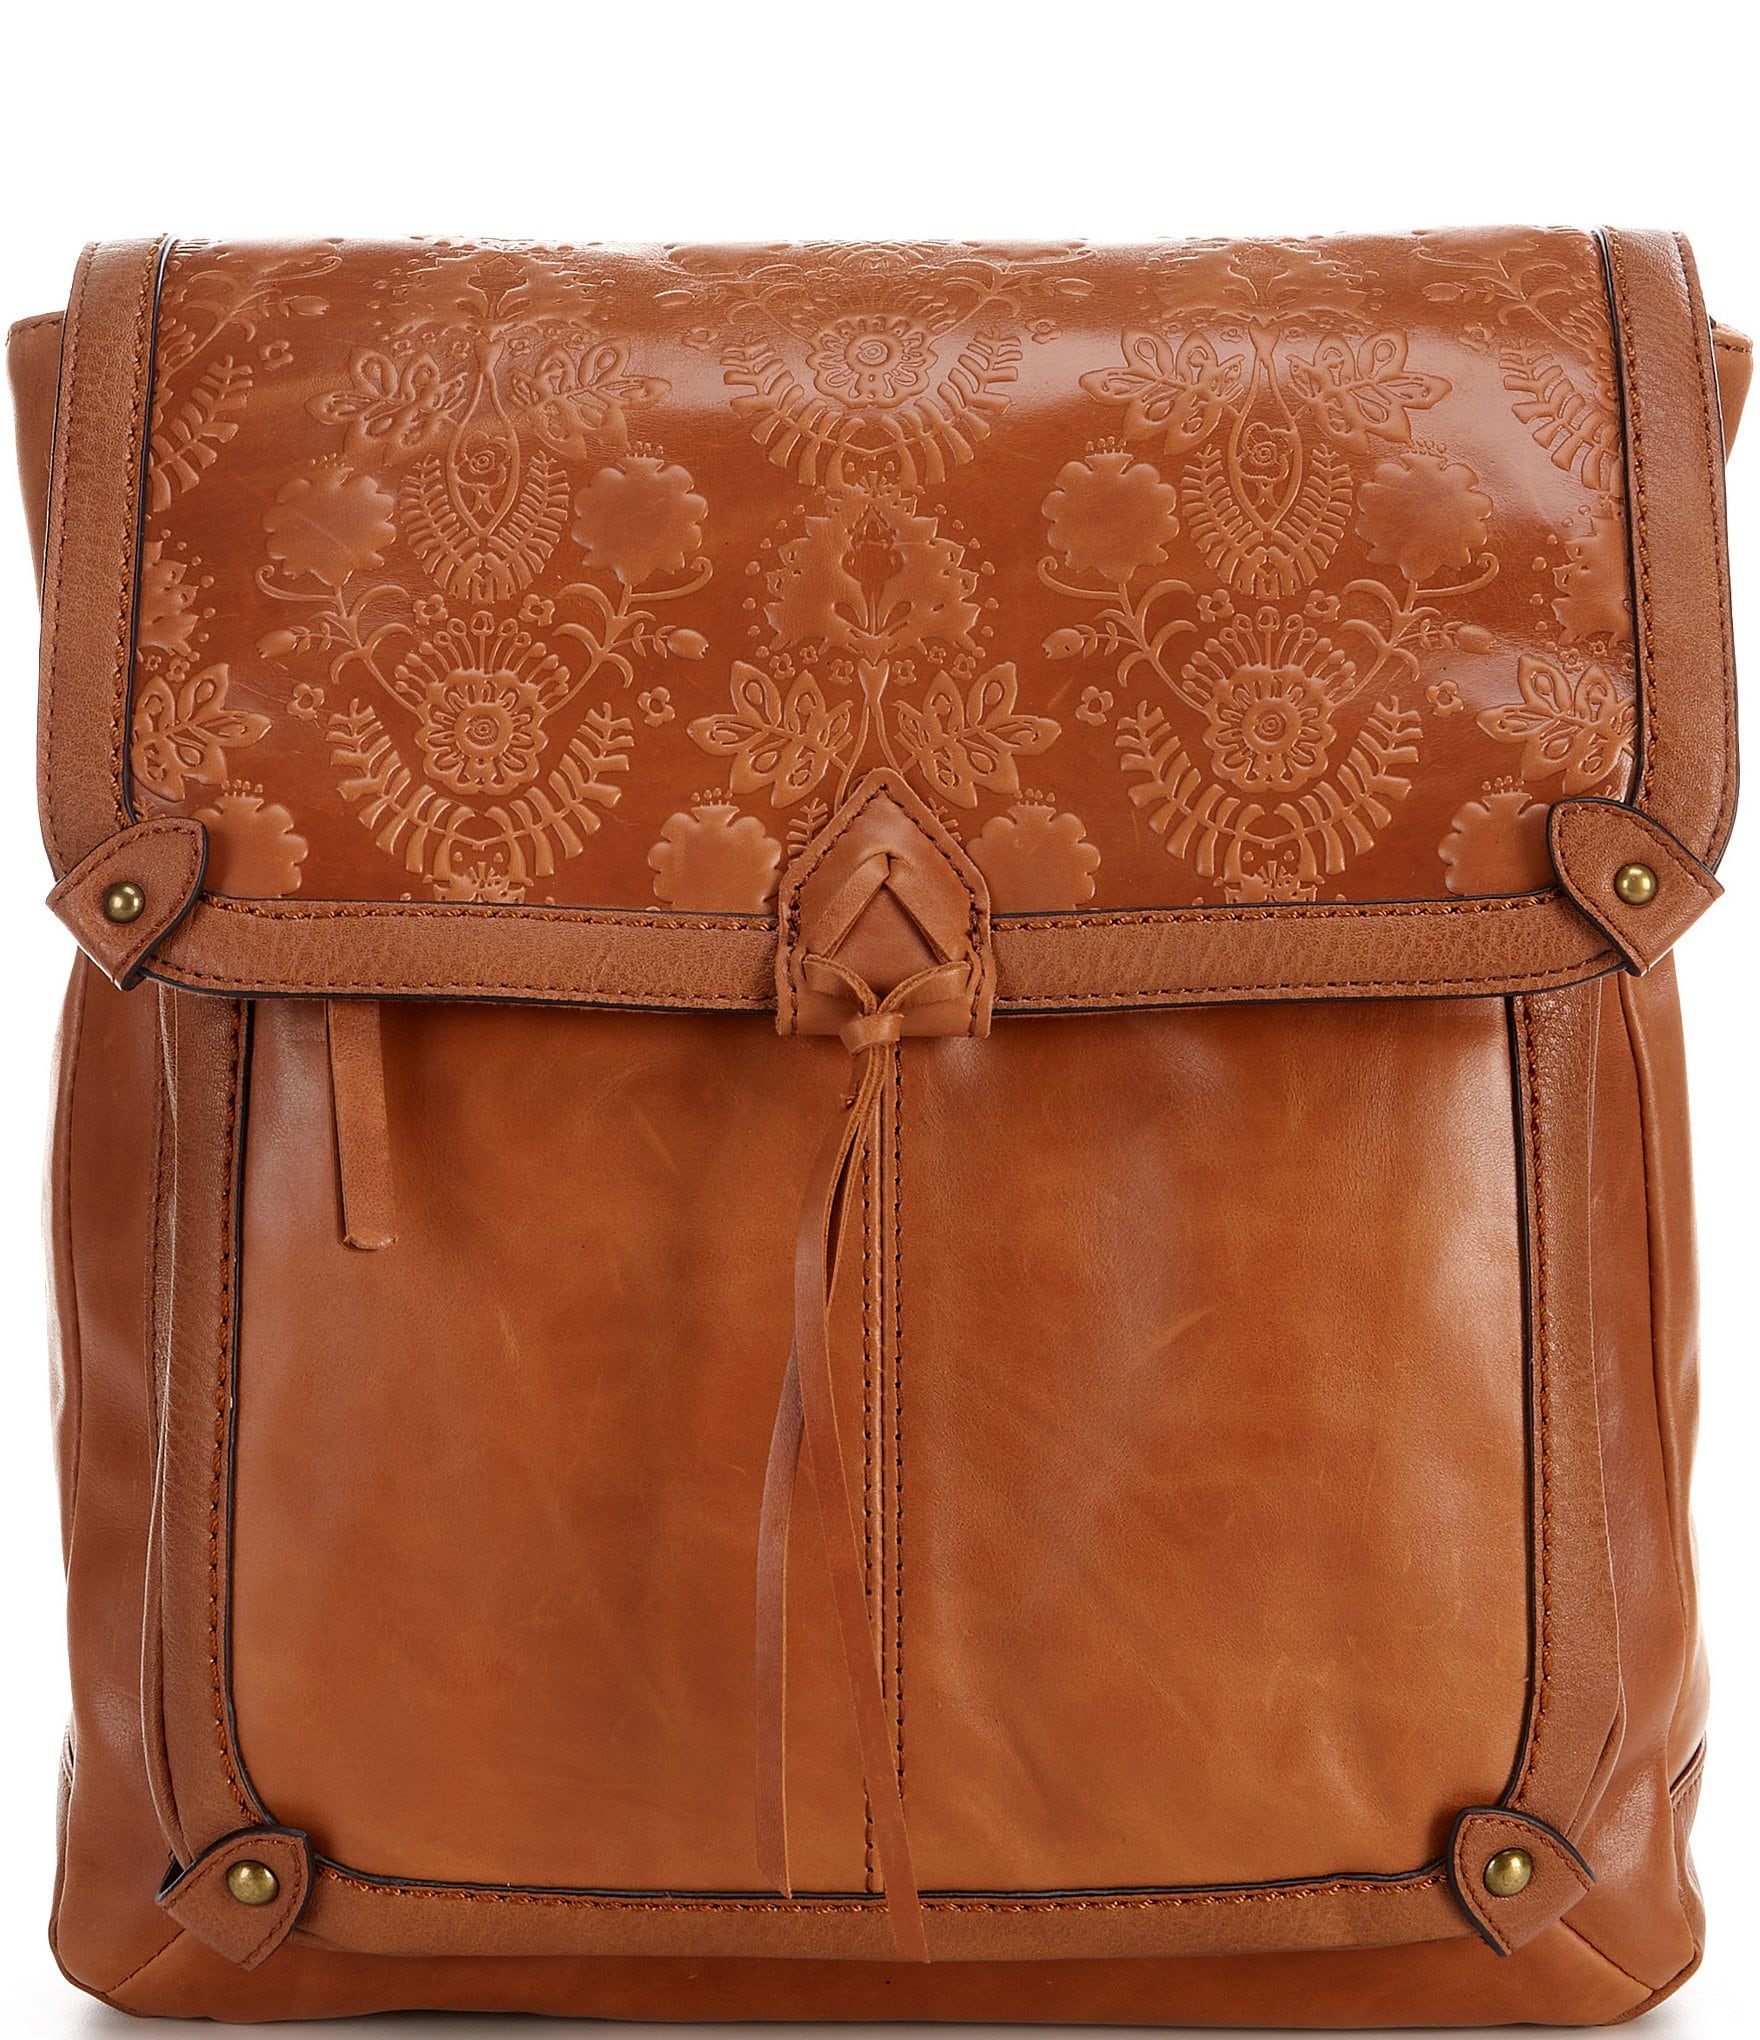 The Sak Ventura Convertible Backpack II Leather - Tobacco Floral Embossed